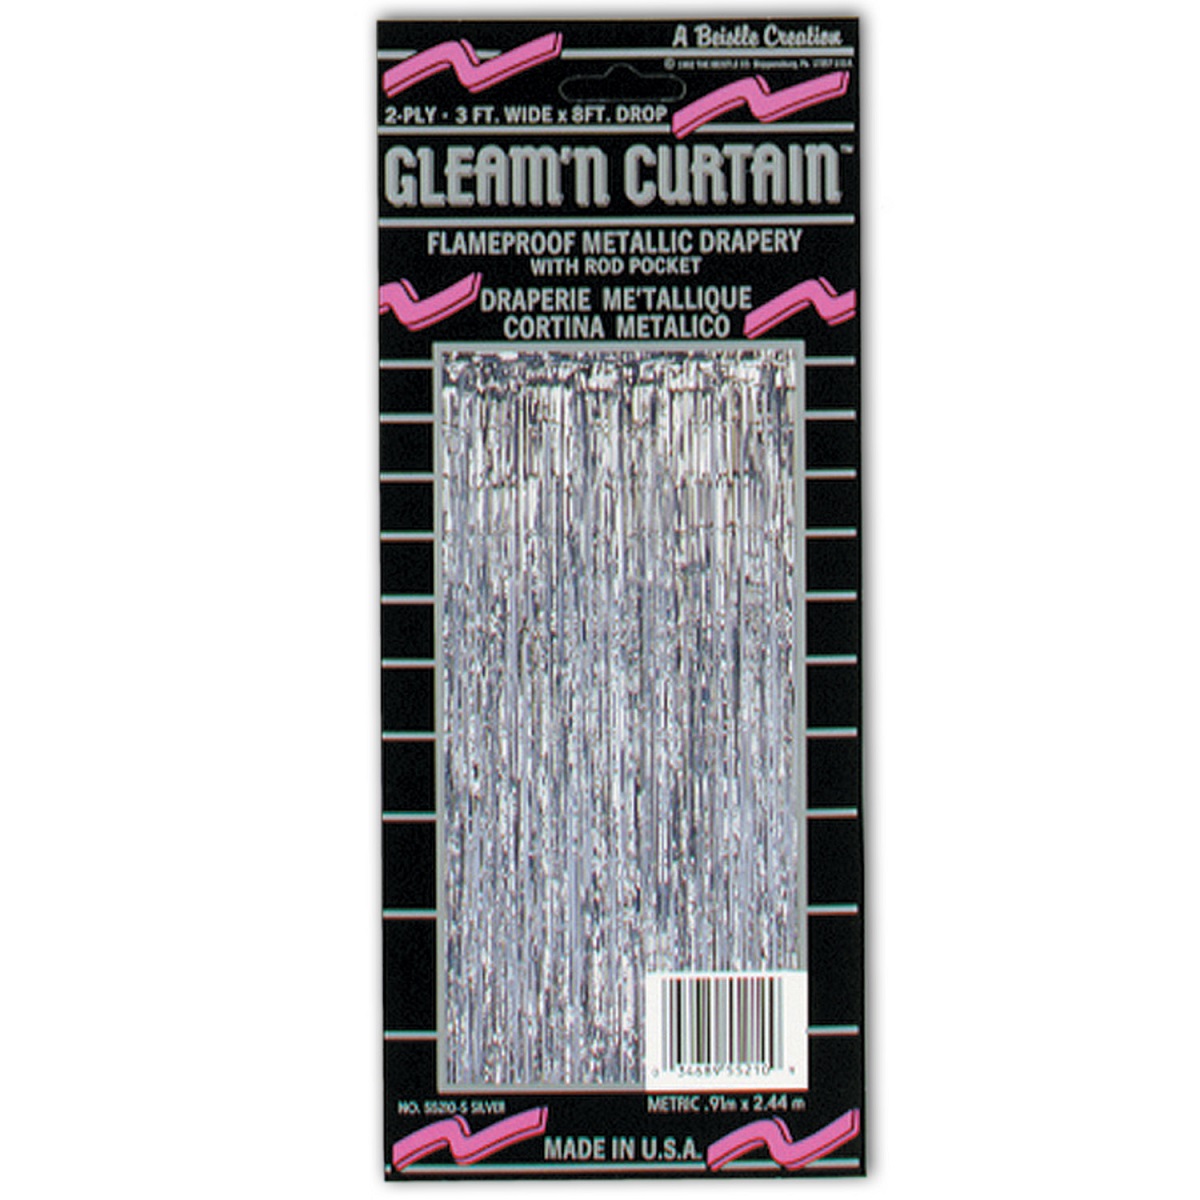 Beistle Pack of 6 Festive Metallic Silver Hanging Gleam'n Curtain Party Decorations 8'